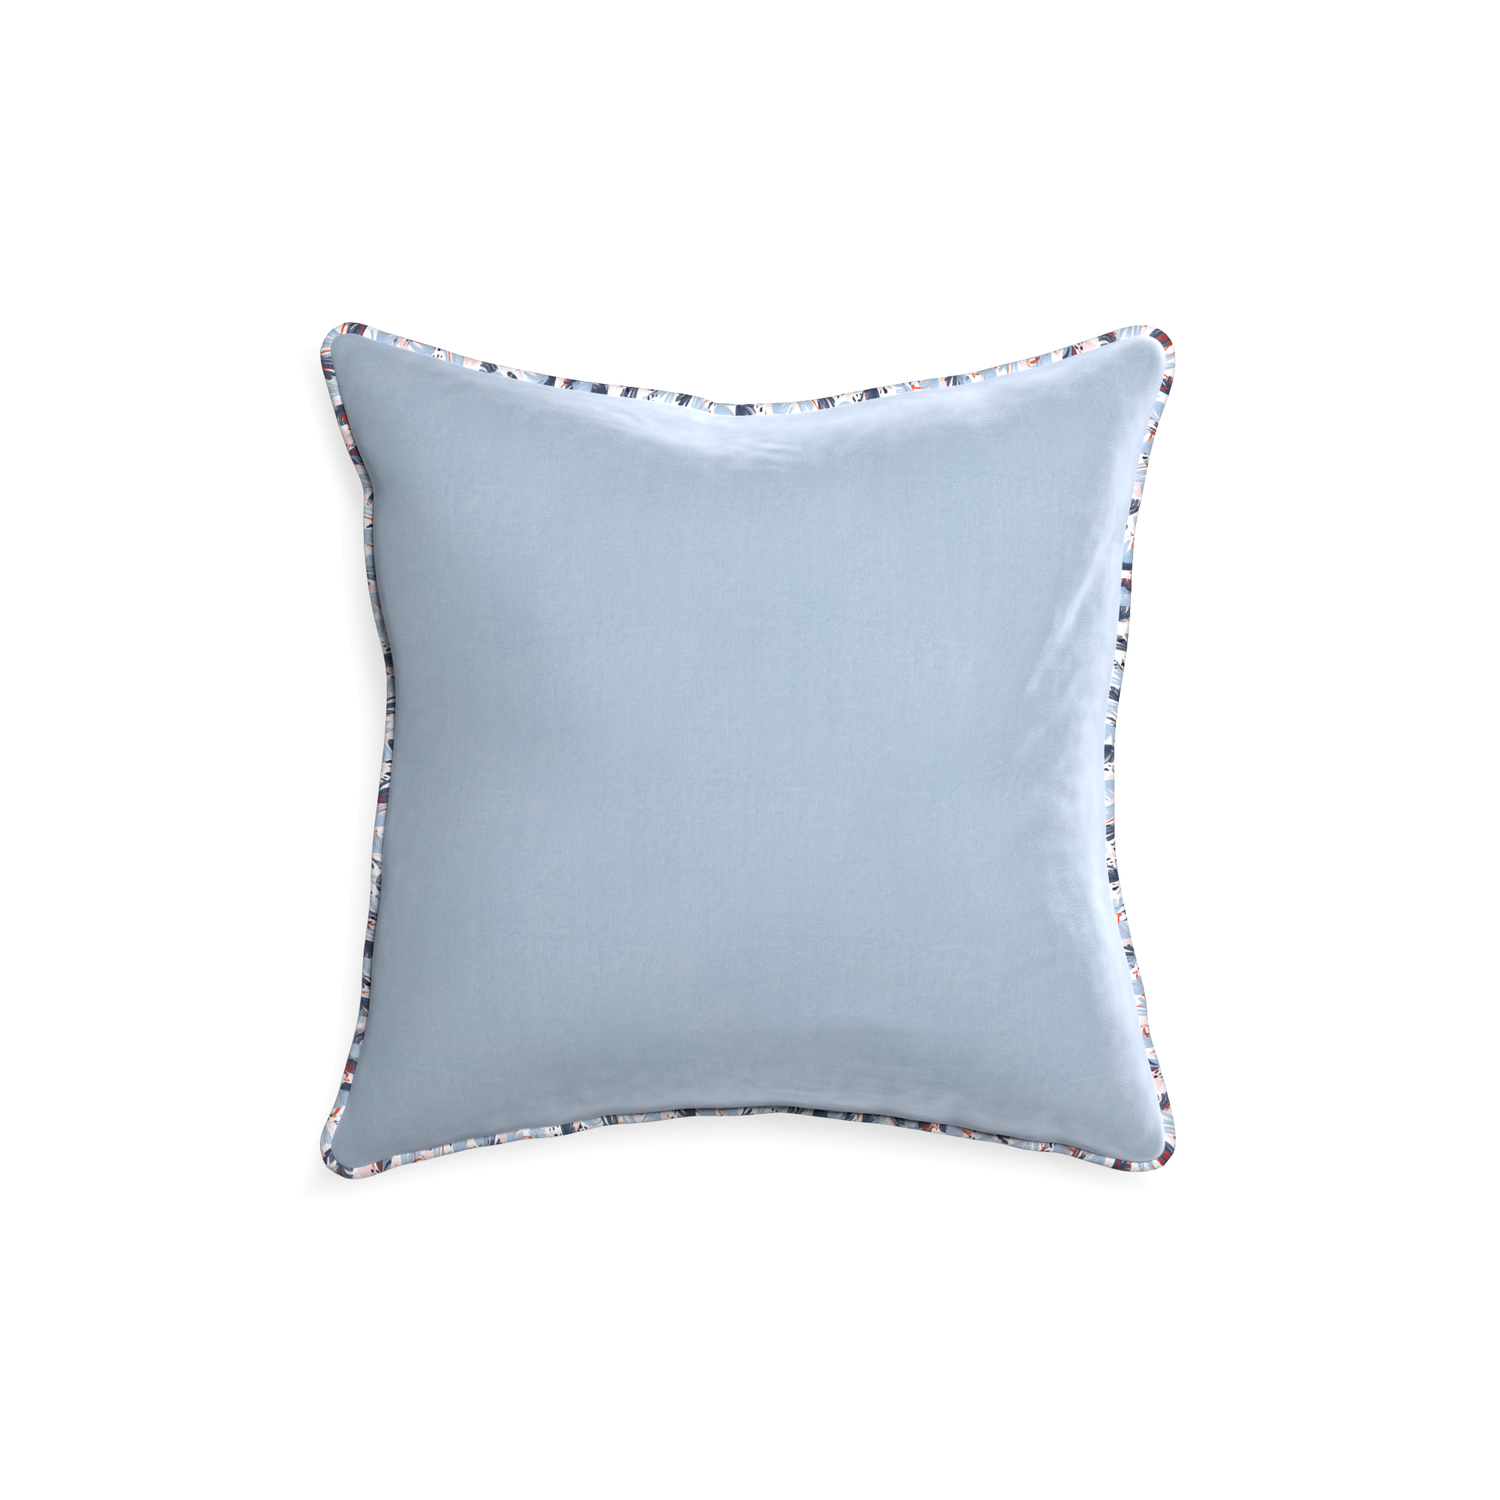 square light blue velvet pillow with red and blue piping